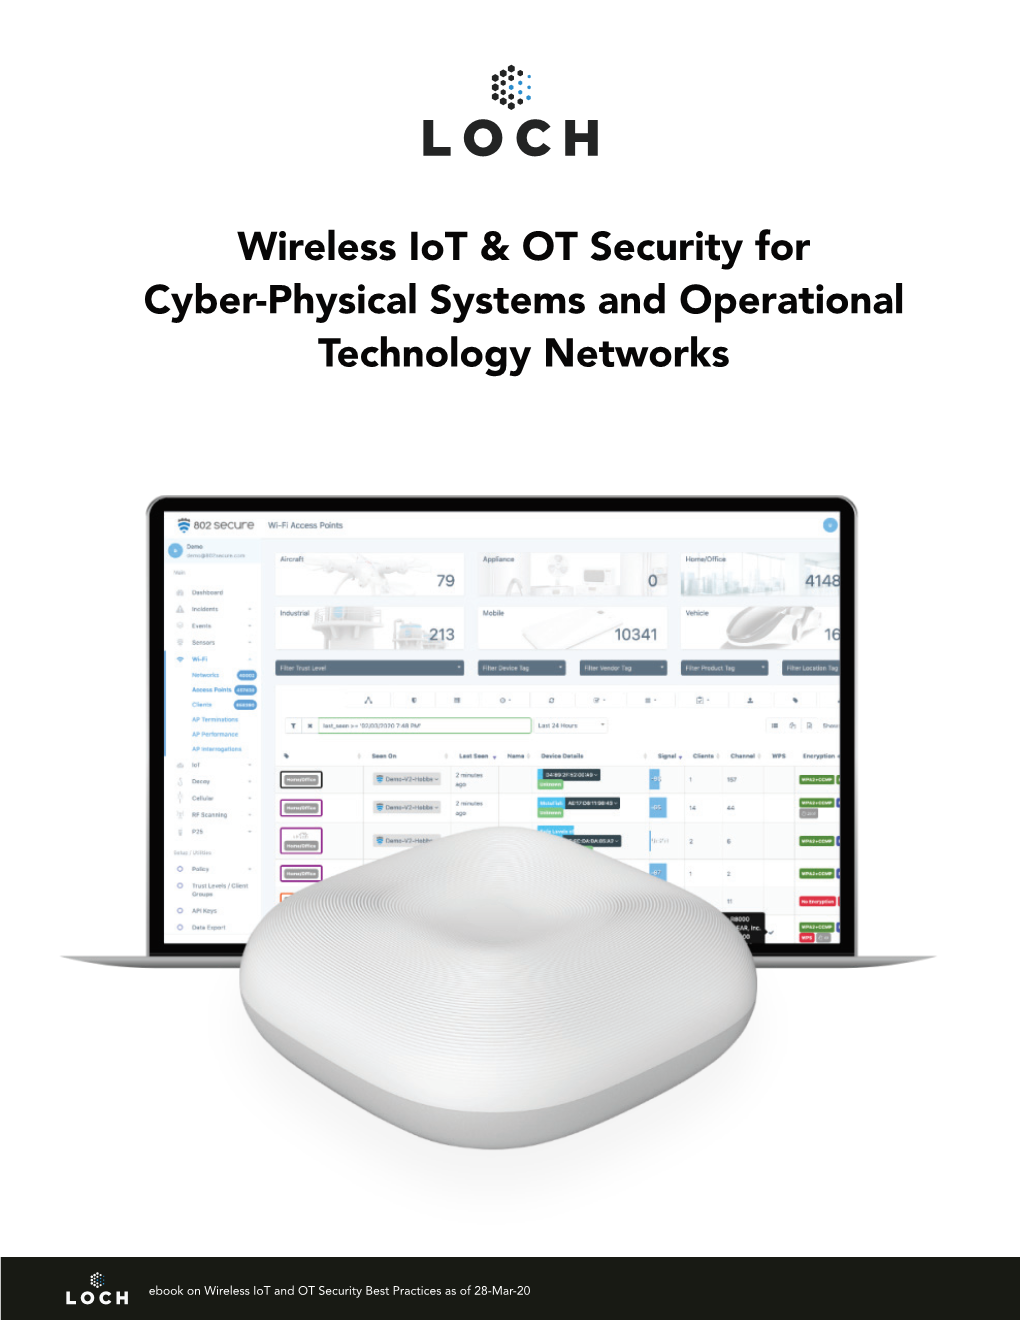 Wireless Iot & OT Security for Cyber-Physical Systems And